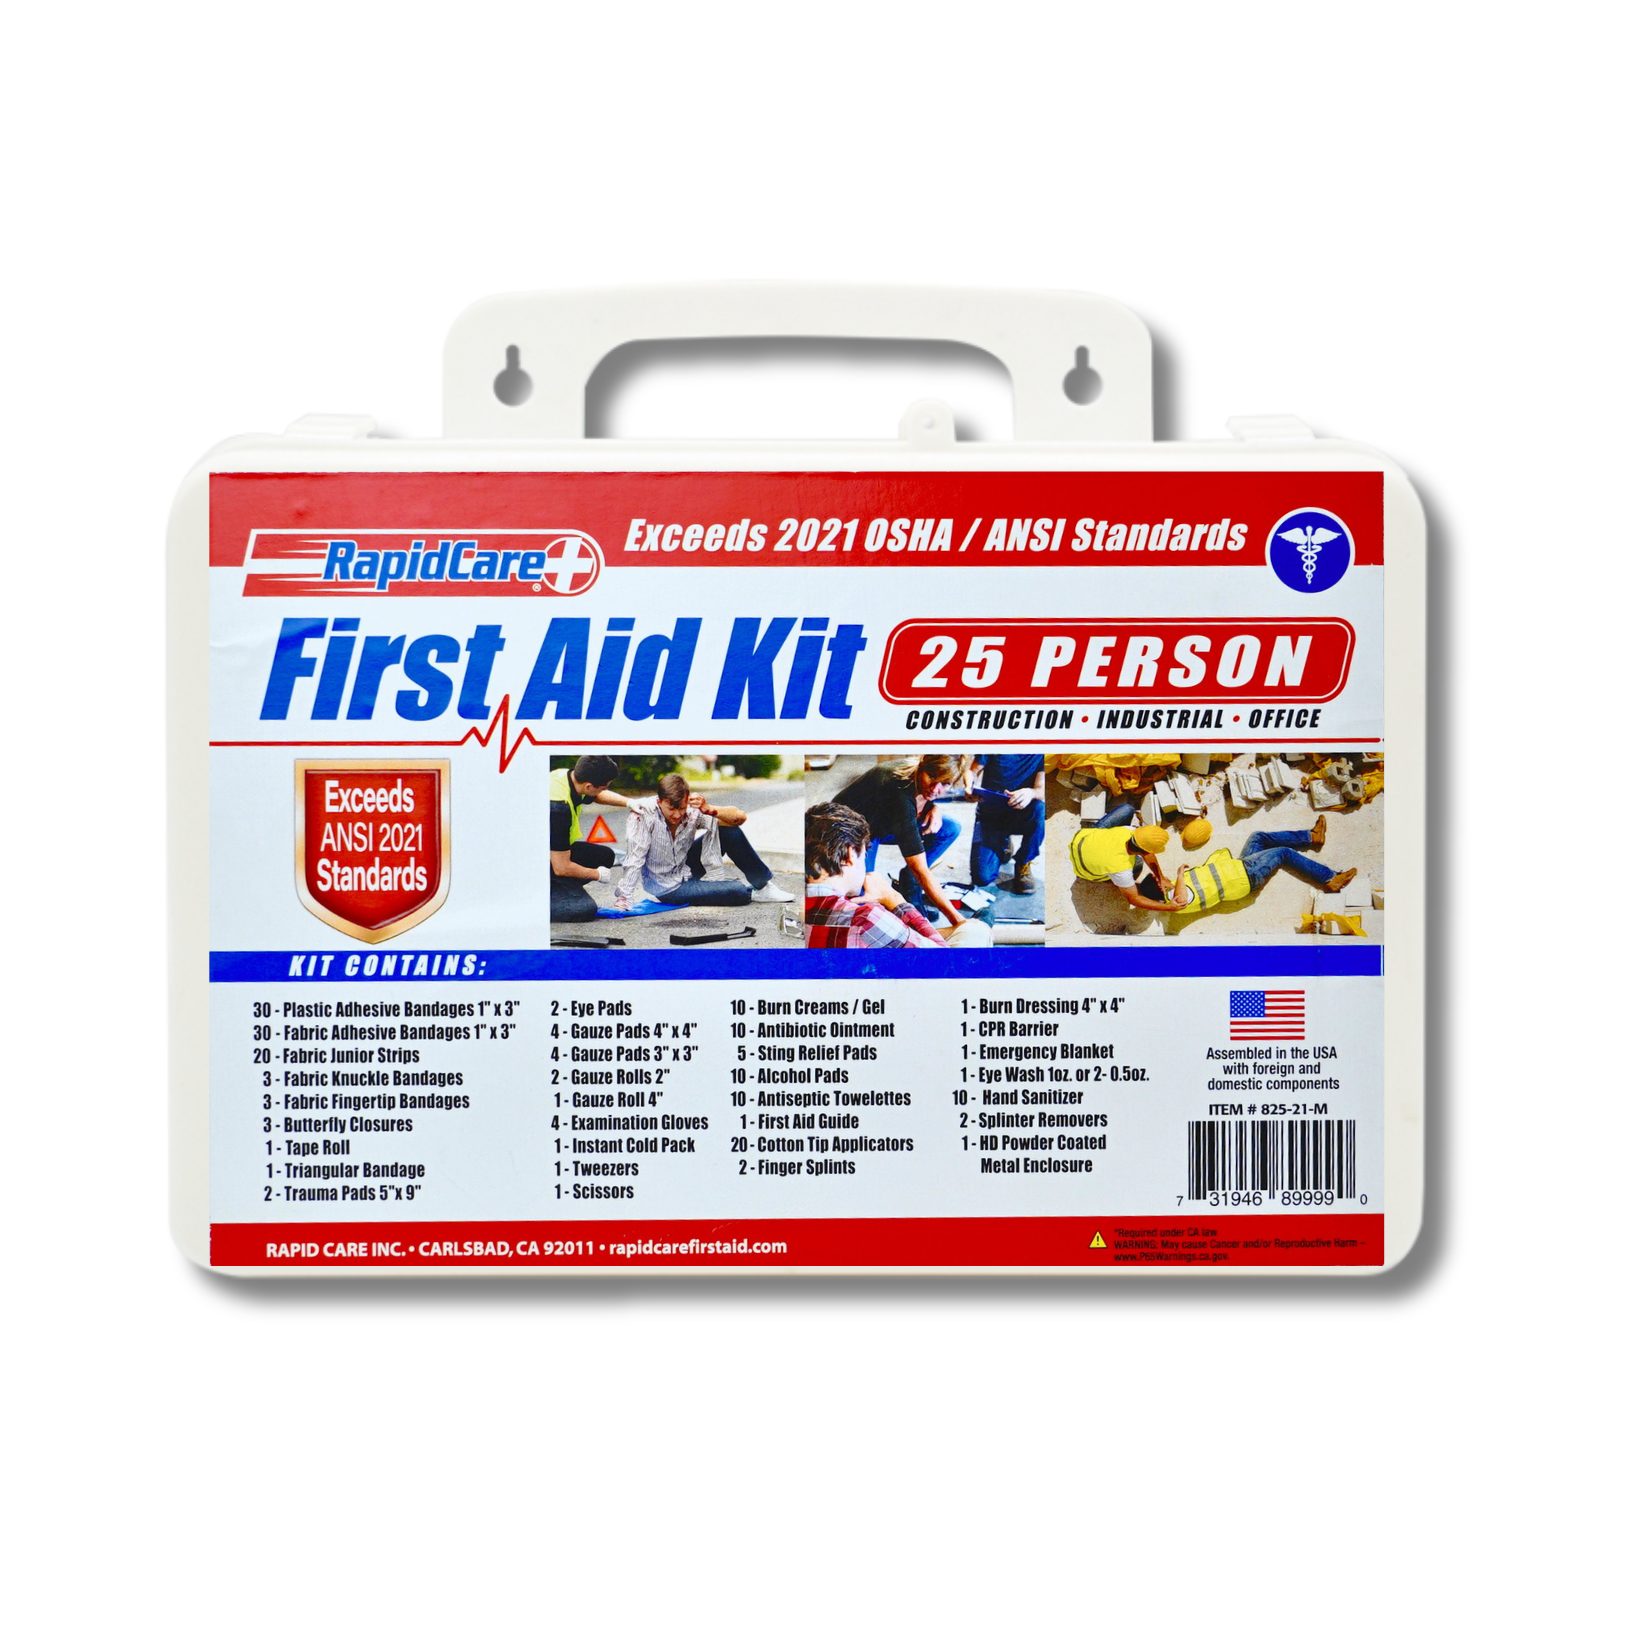 InstaCare First Aid Kit/Reusable Bandage Holder with Logo